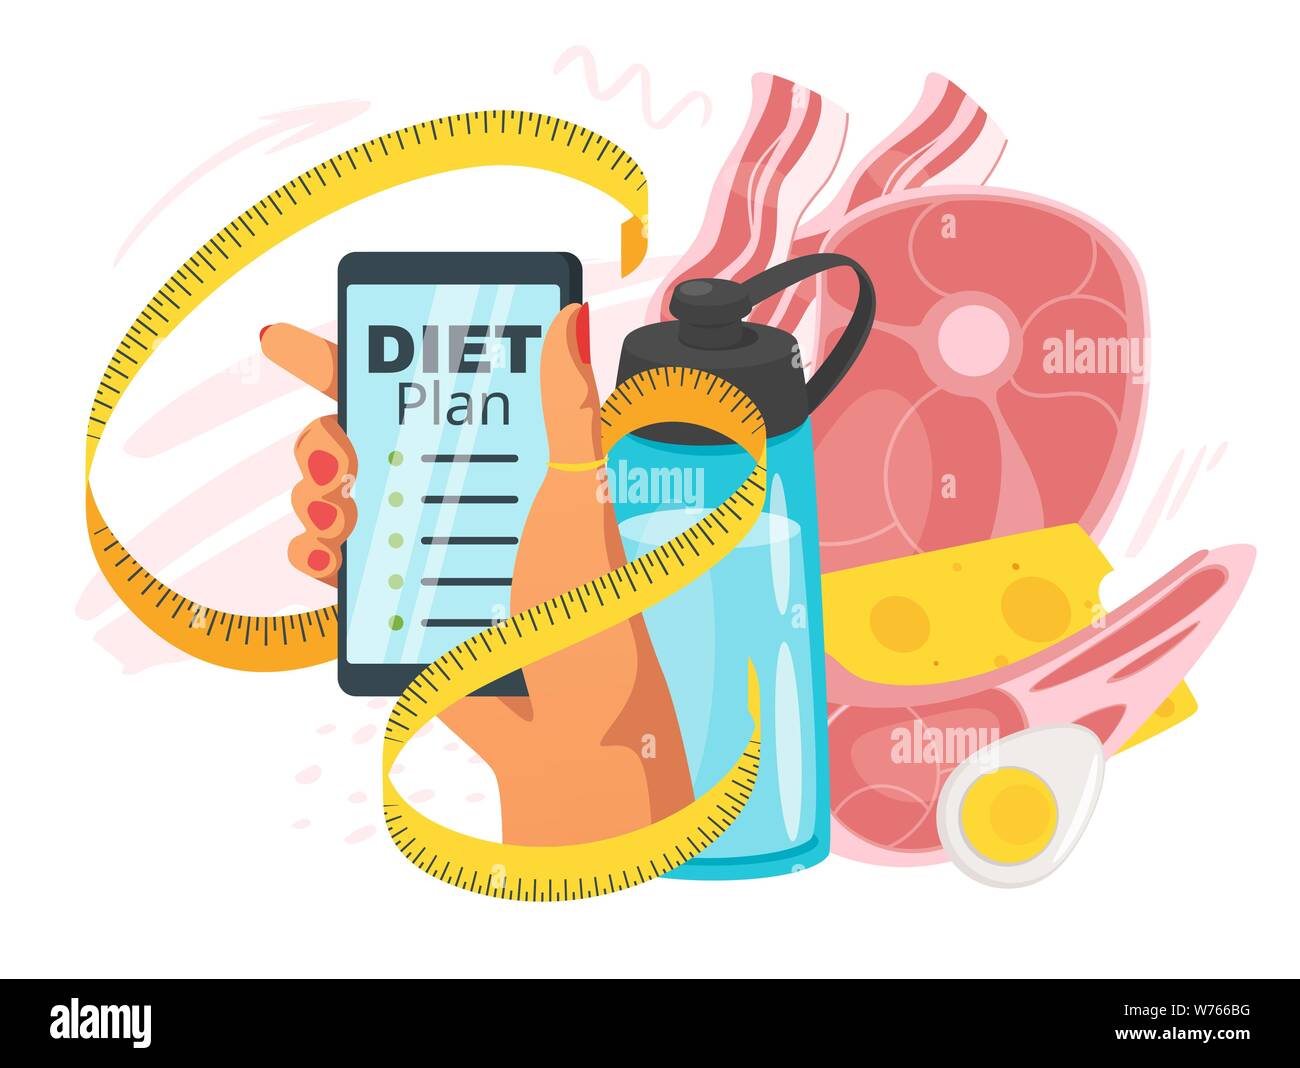 Carnivore diet plan app vector web banner template. Healthy eating, lifestyle. Slimming, calories counting recipes for women poster. Hand holding smar Stock Vector